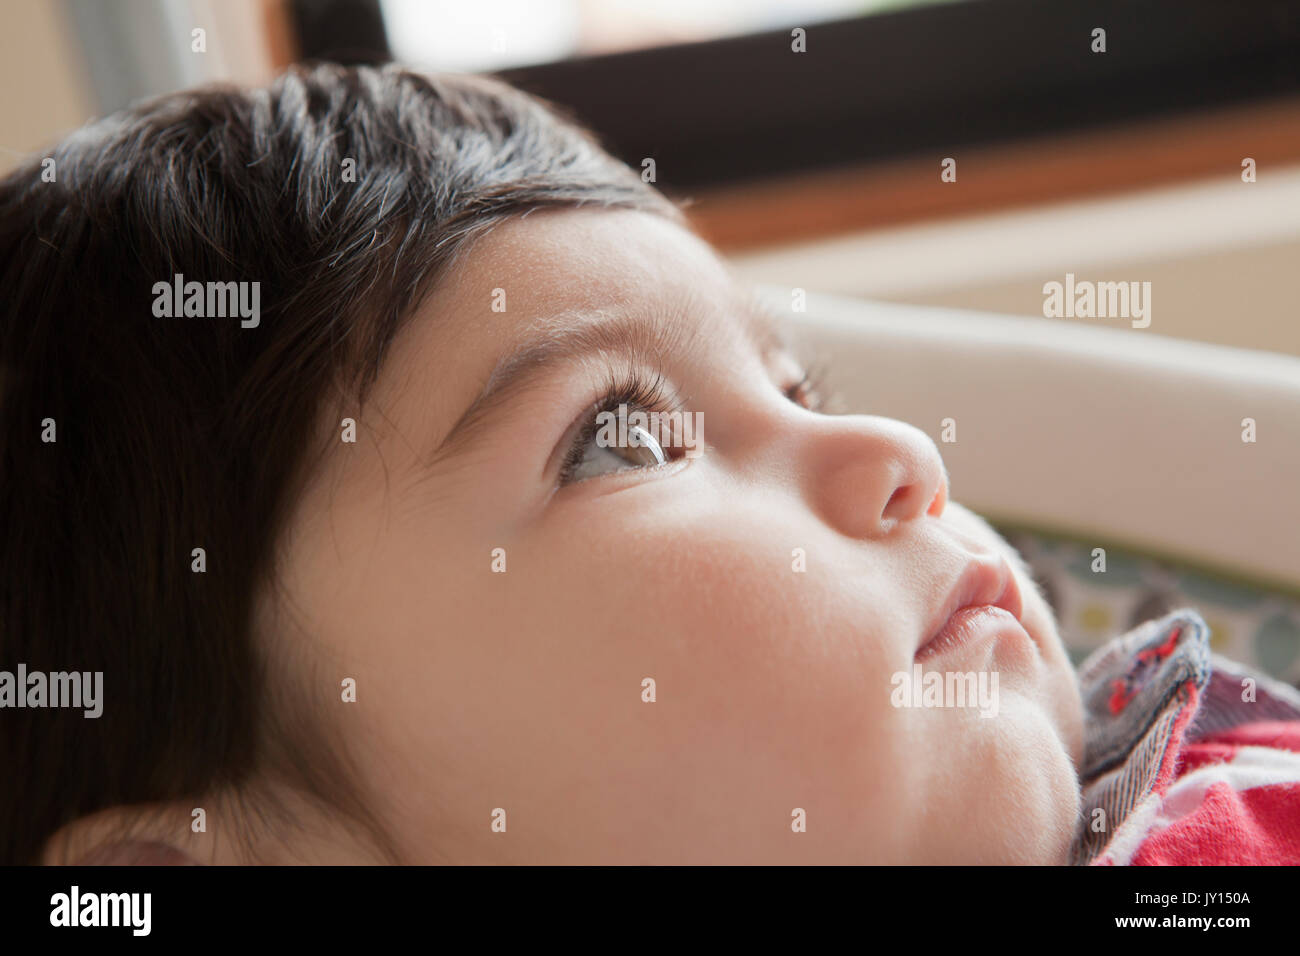 Hispanic baby boy looking up Banque D'Images